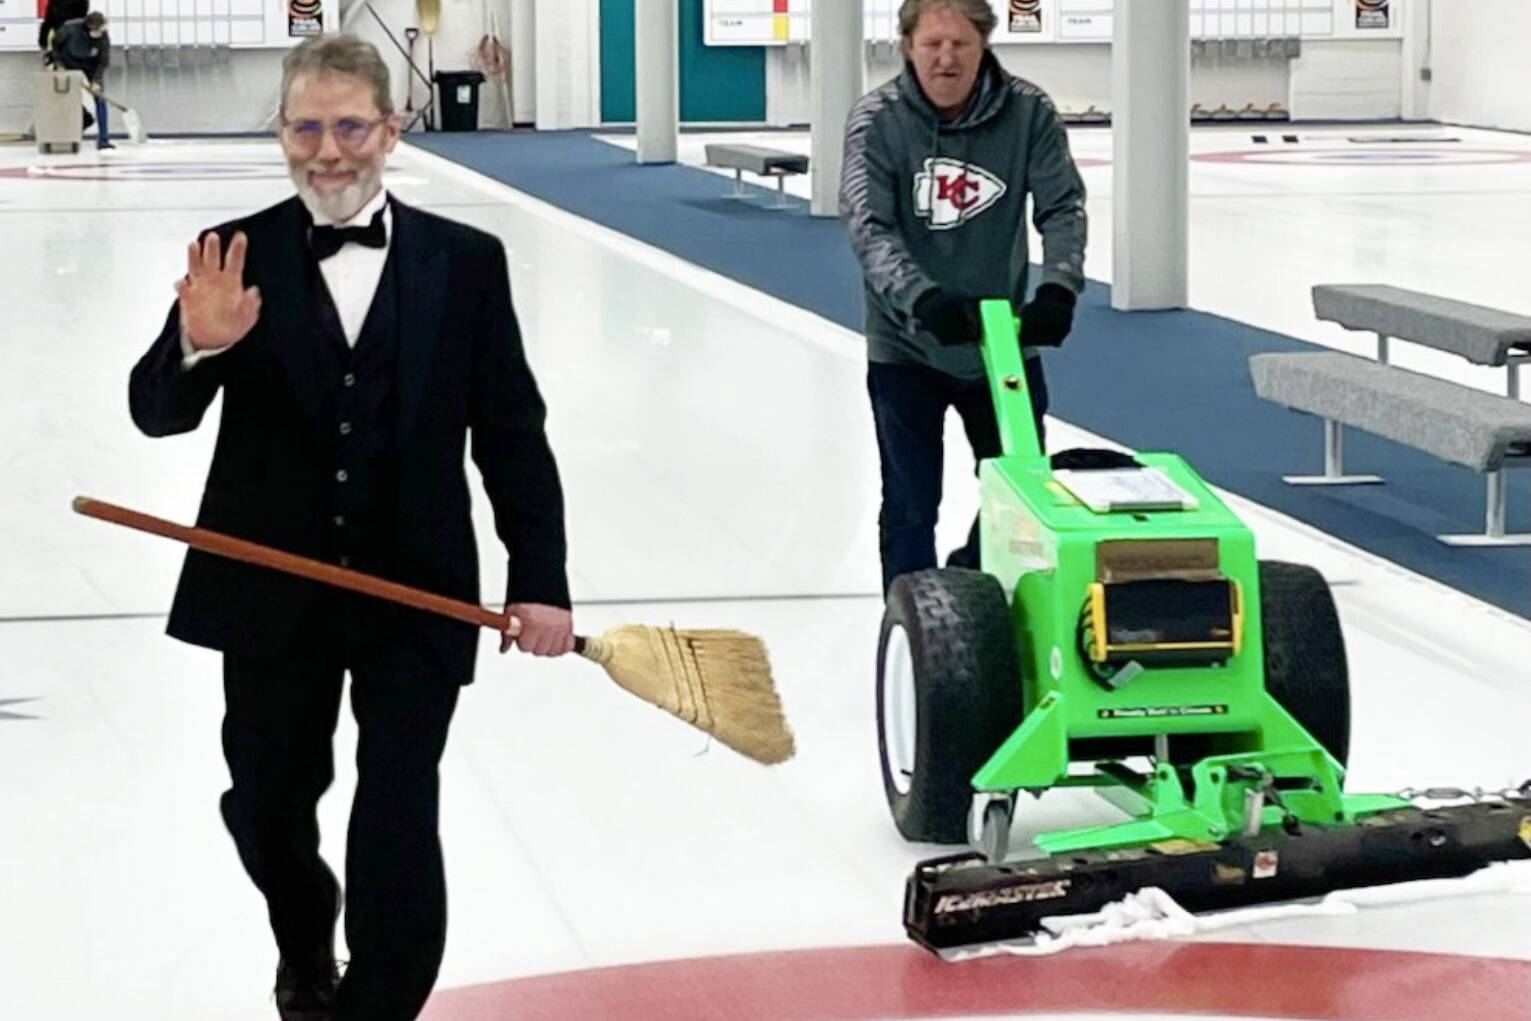 Retiring Trail Curling Centre ice technician Mike Williams went out in style. Williams donned a tuxedo and a broom for making a clean sweep of his last sheet of ice, and handed over the scraper and pebbler to new ice technician Murray Walsh. Photo: Submitted